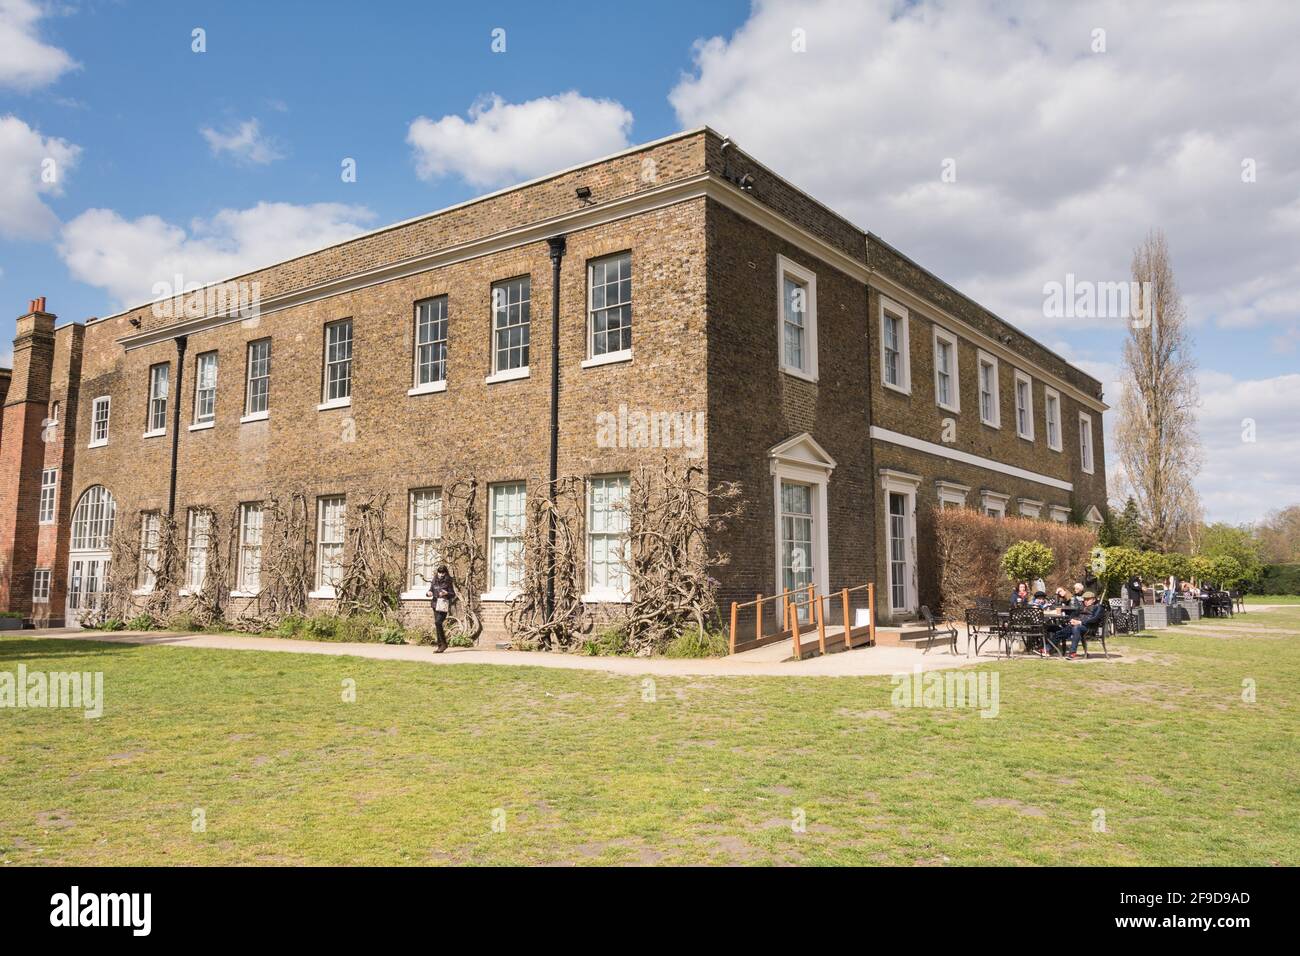 People eating al fresco at Fulham Palace, the historic house and gardens of the Bishop of London on Bishop's Avenue, Fulham, London, England, U.K. Stock Photo